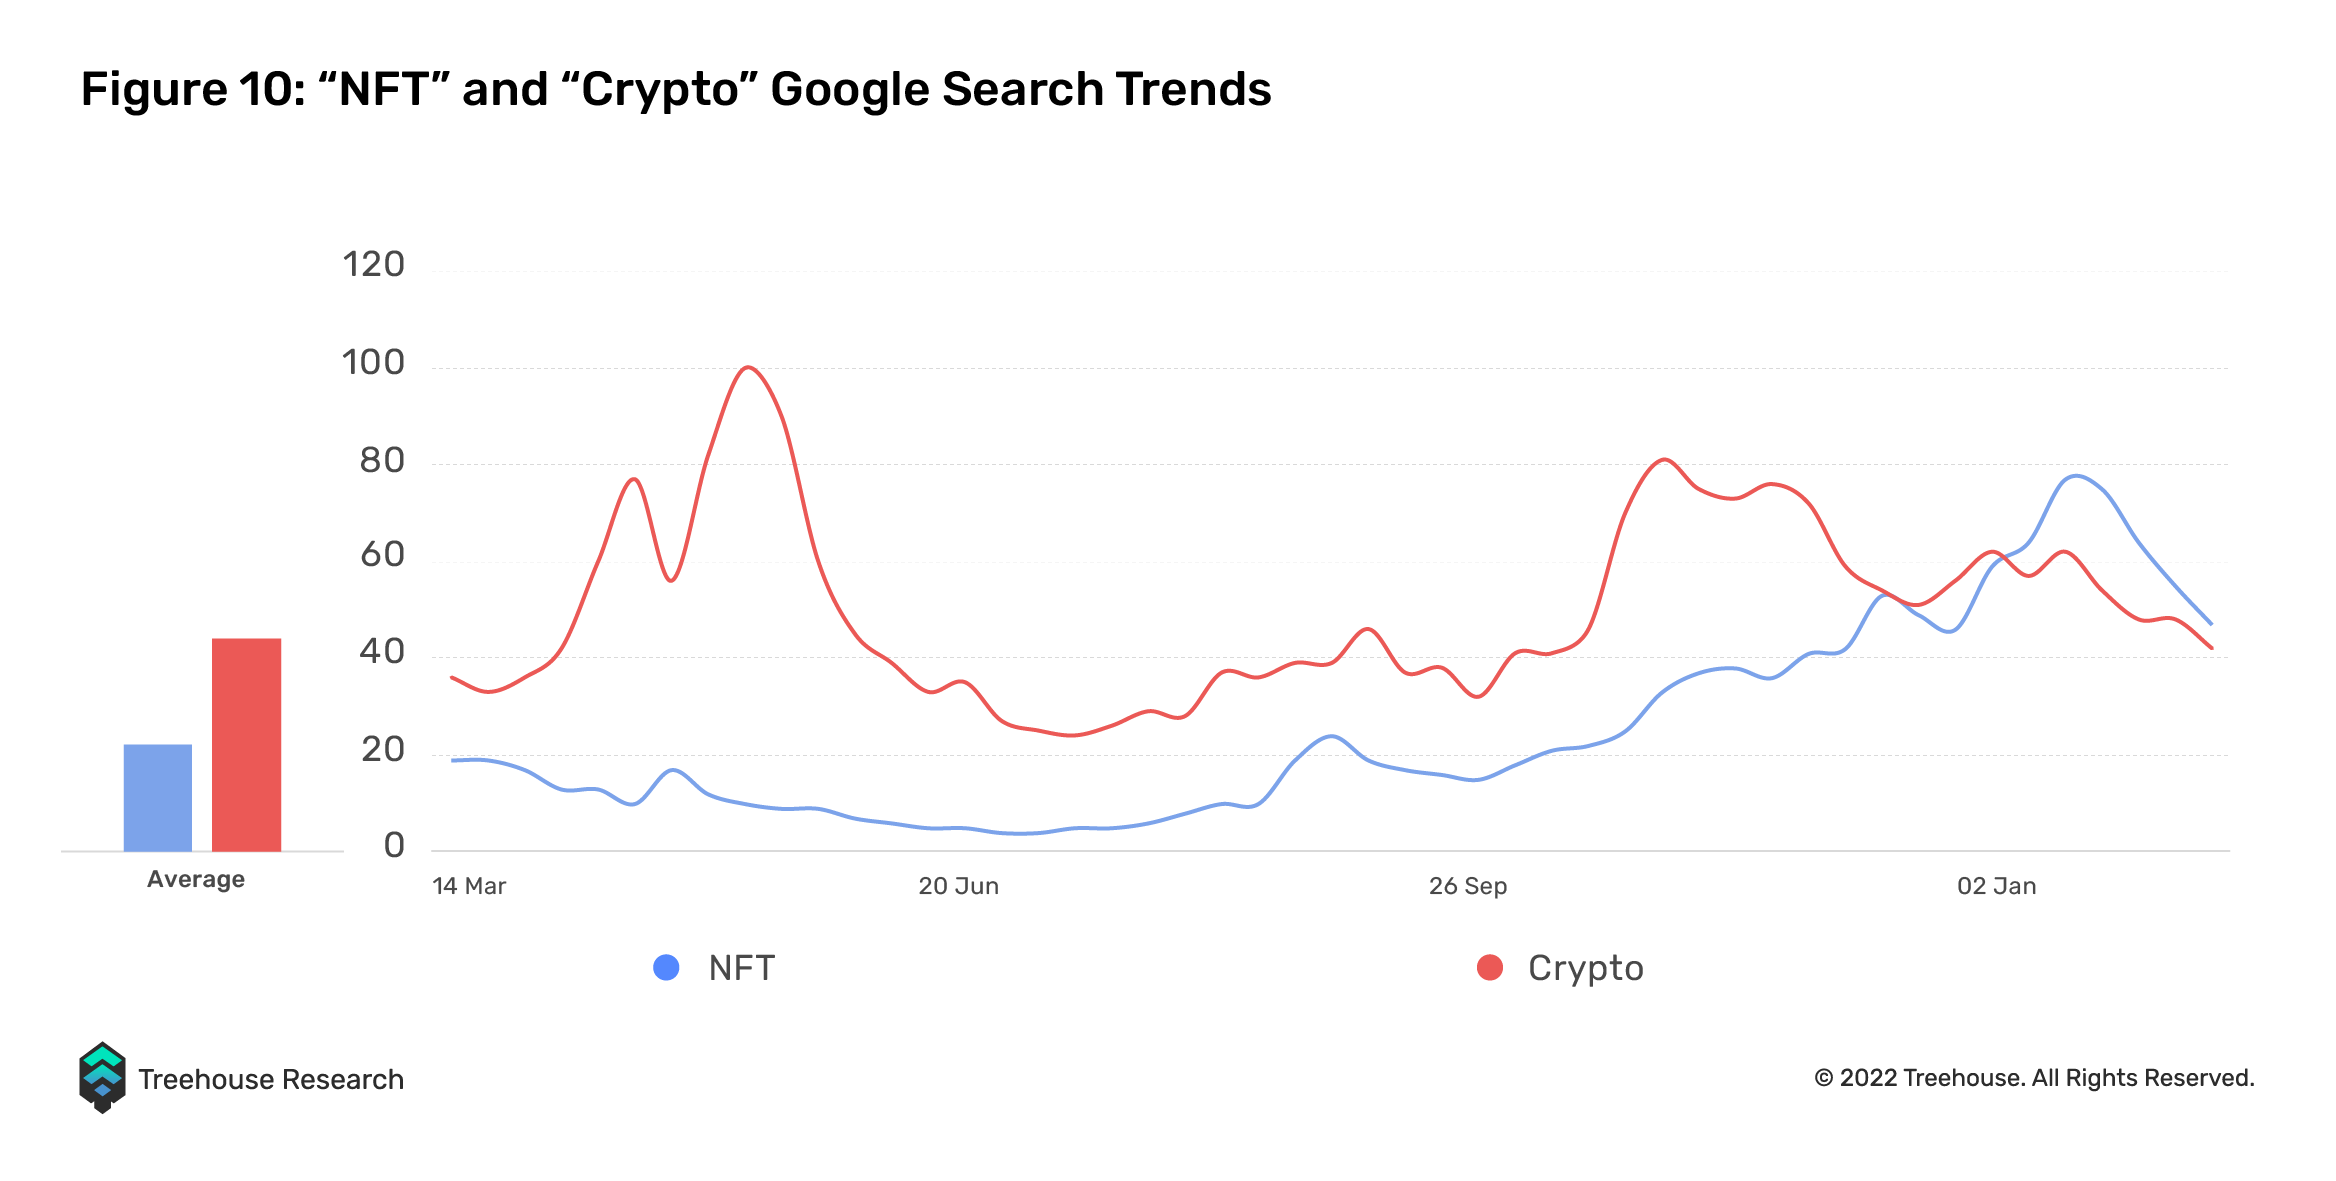 NFT and Crypto google search trends